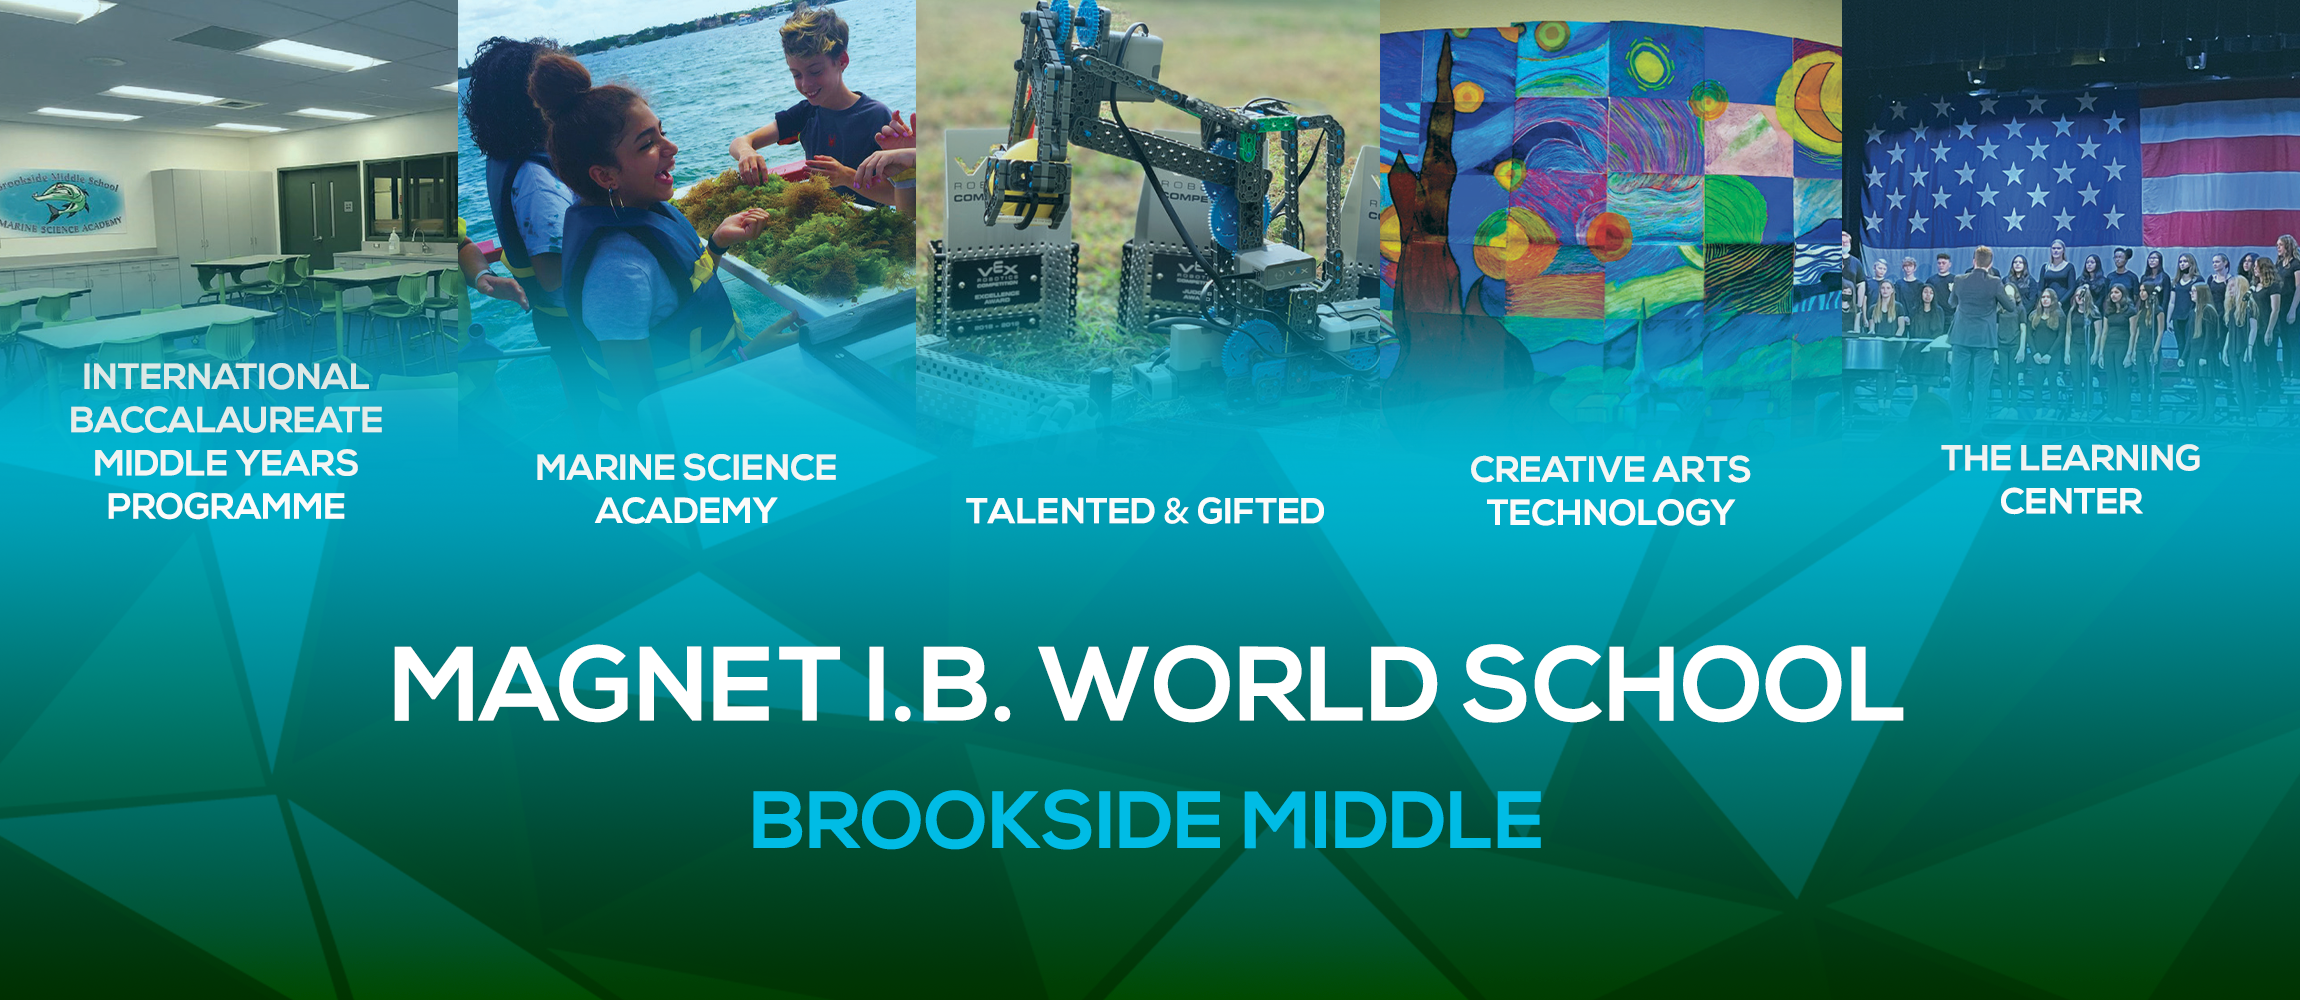 banner with images of kids and their programs they are associated with, international baccalaureate middle years programme, marine science academy, talented & gifted, creative arts technology, the learning center for Magnet I.B. World School Brookside Middle School